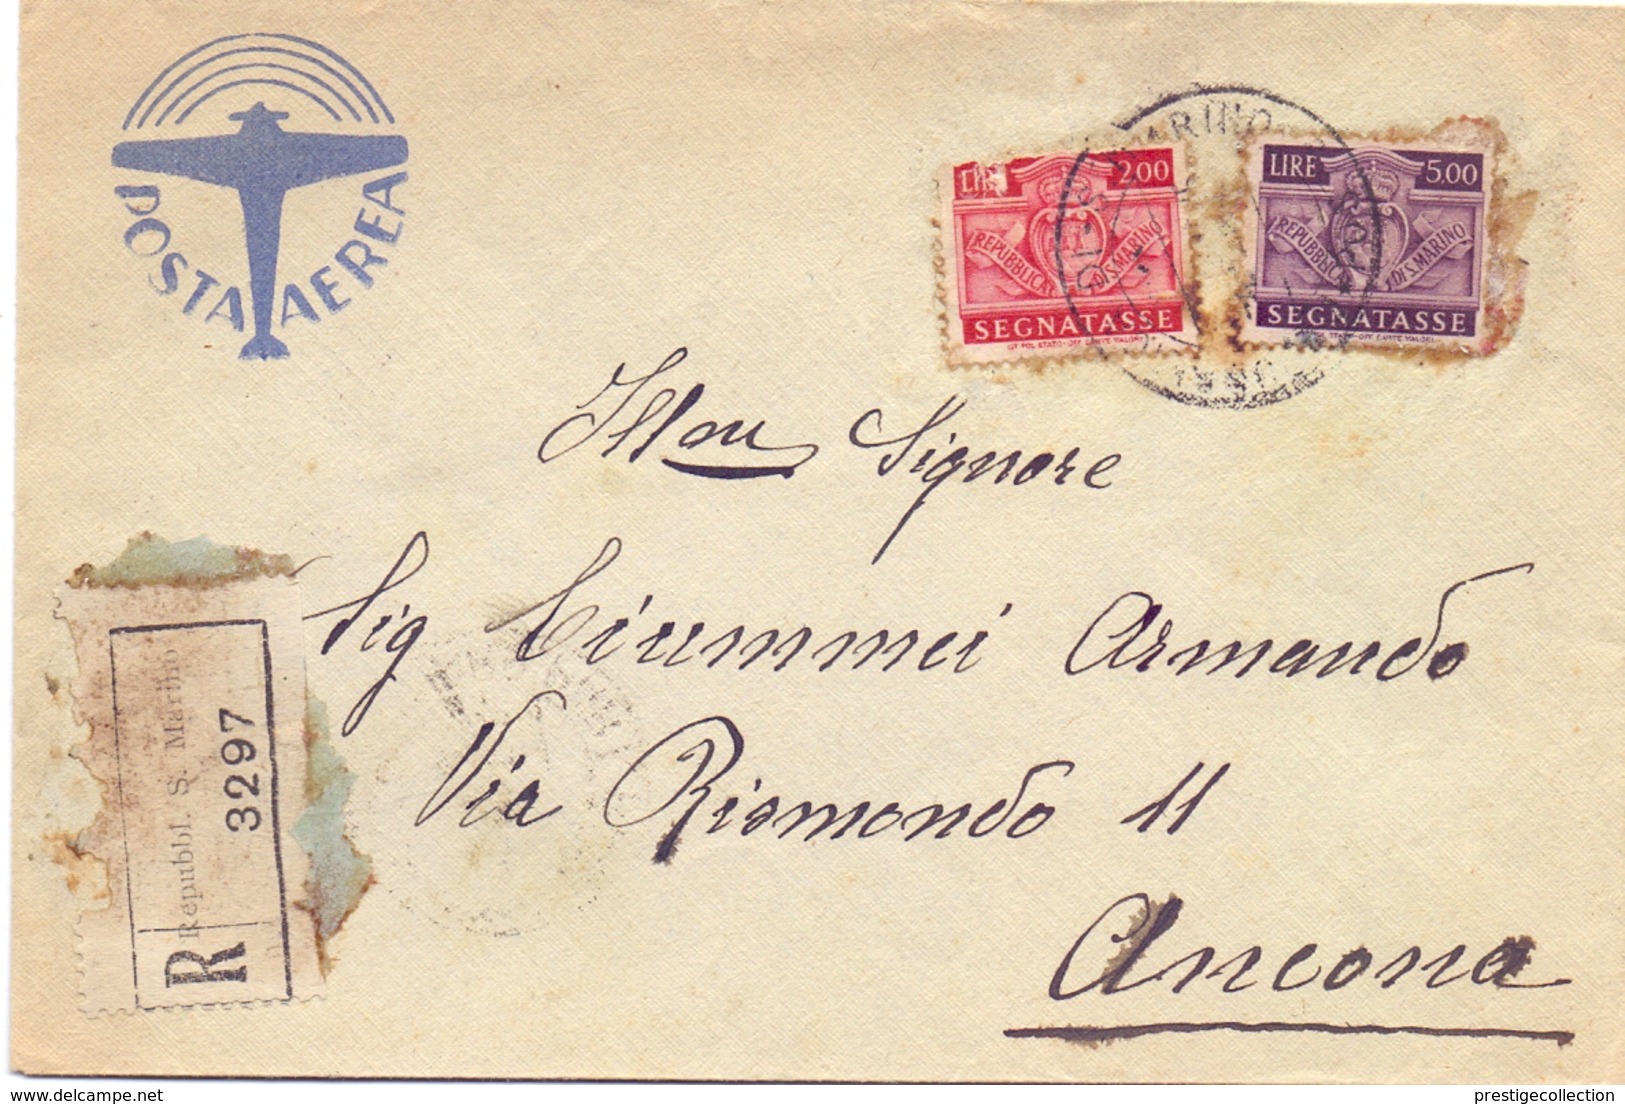 TORINO 1945 COVER AIR MAIL REGISTRED MAIL  (FEB201081) - Correo Aéreo